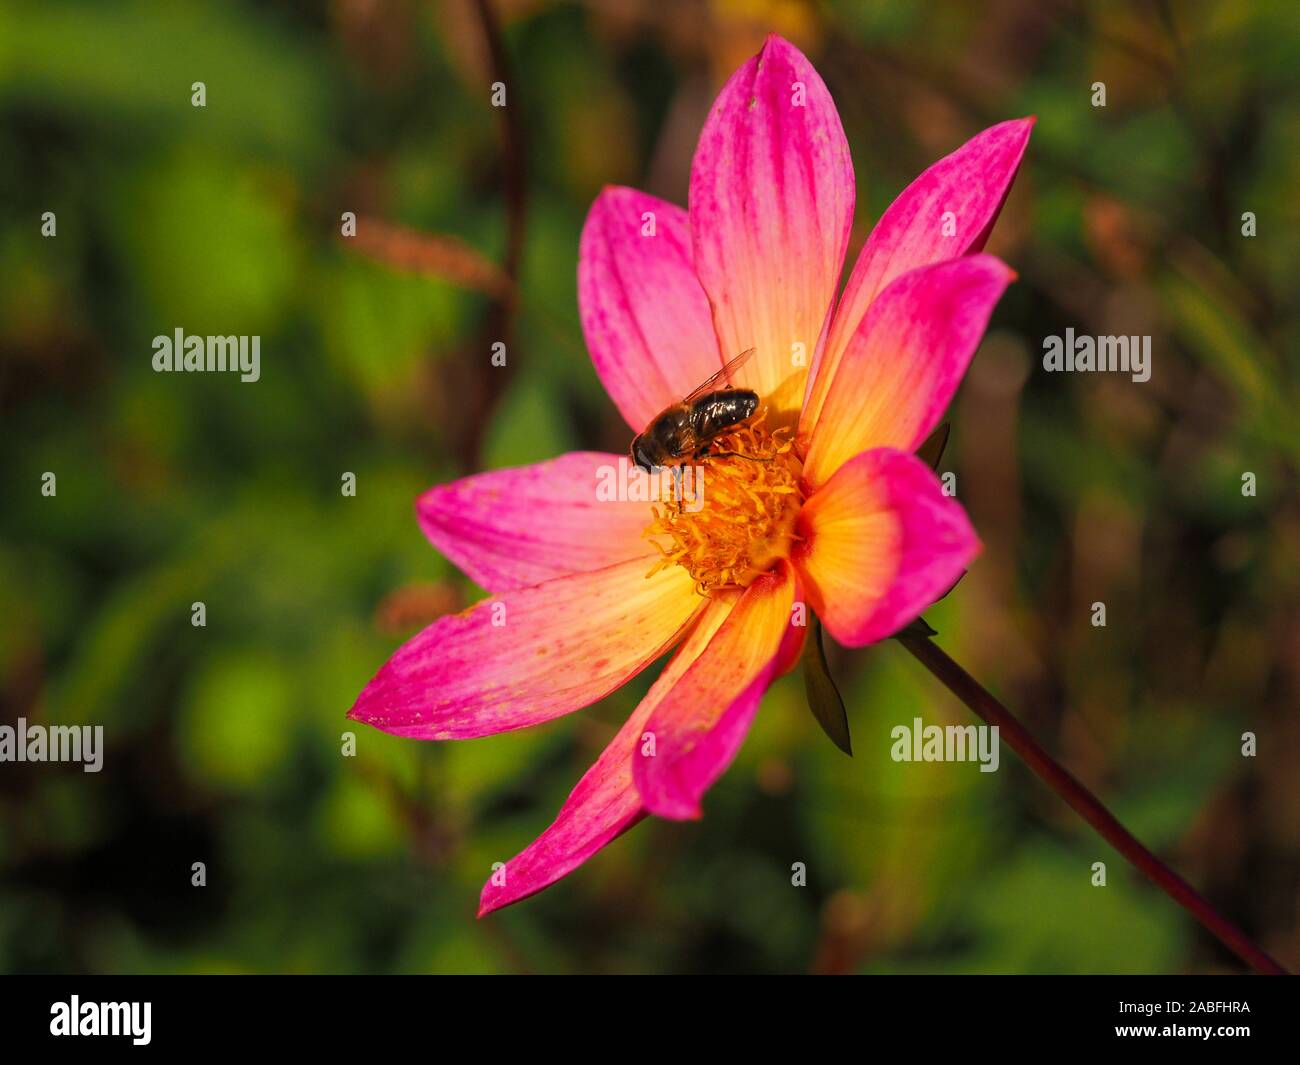 Pretty single Dahlia flower with pink and yellow petals and a honey bee in an autumn garden Stock Photo